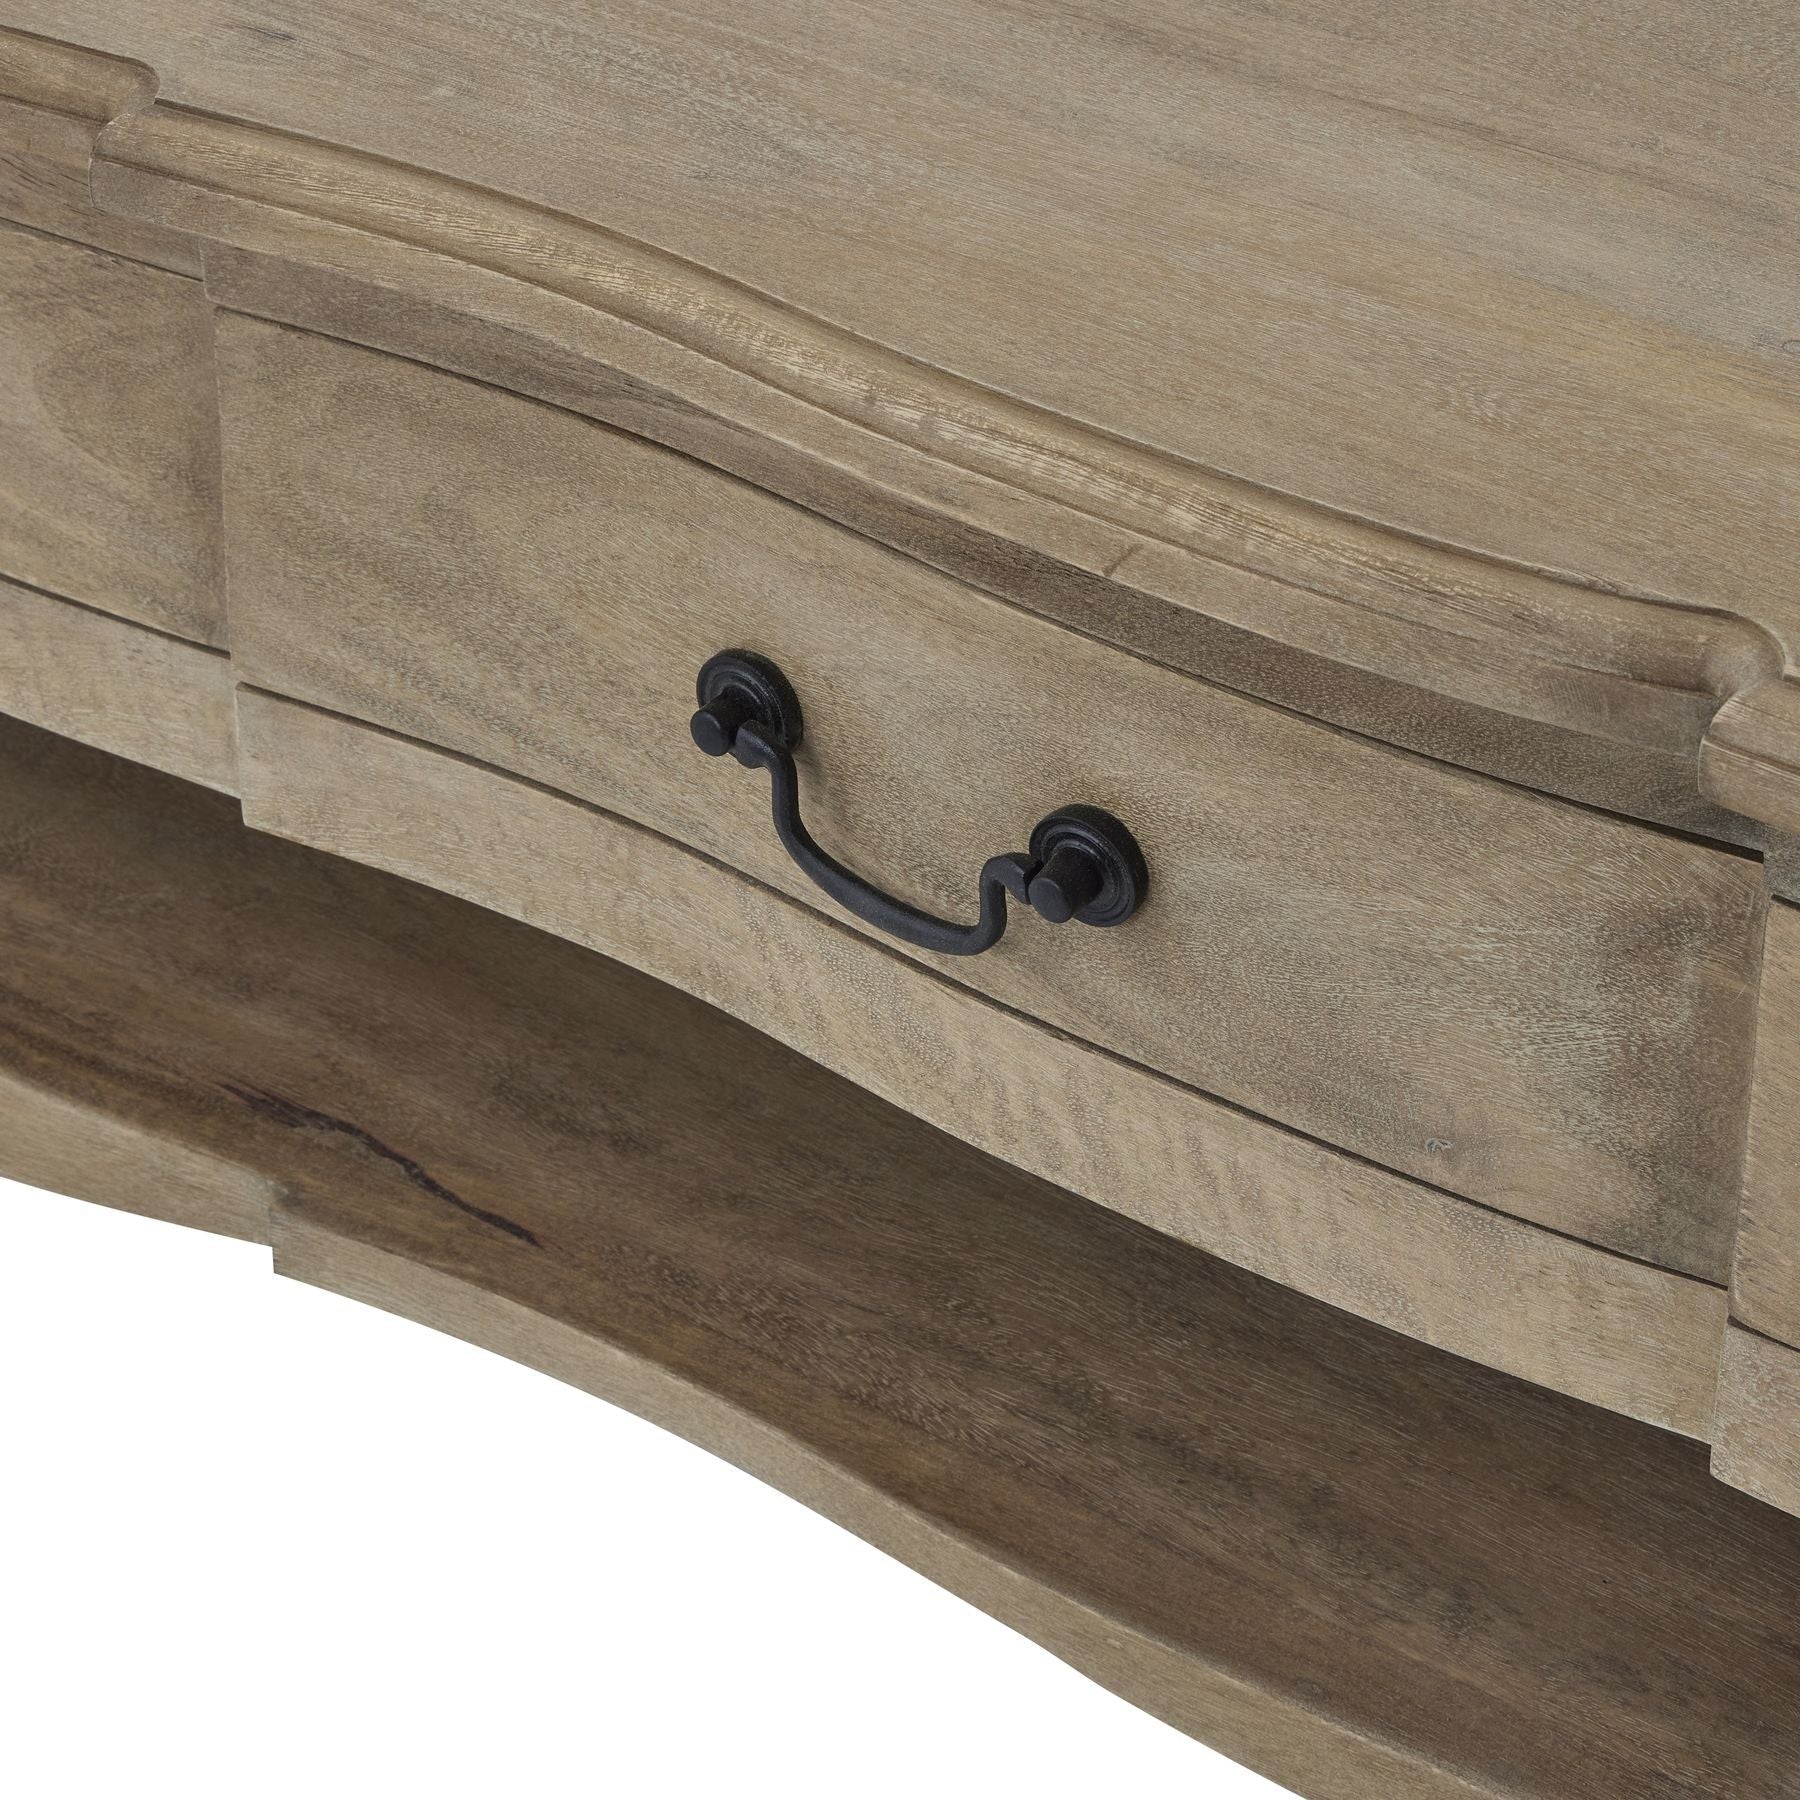 Copgrove Collection 2 Drawer Coffee Table - Ashton and Finch